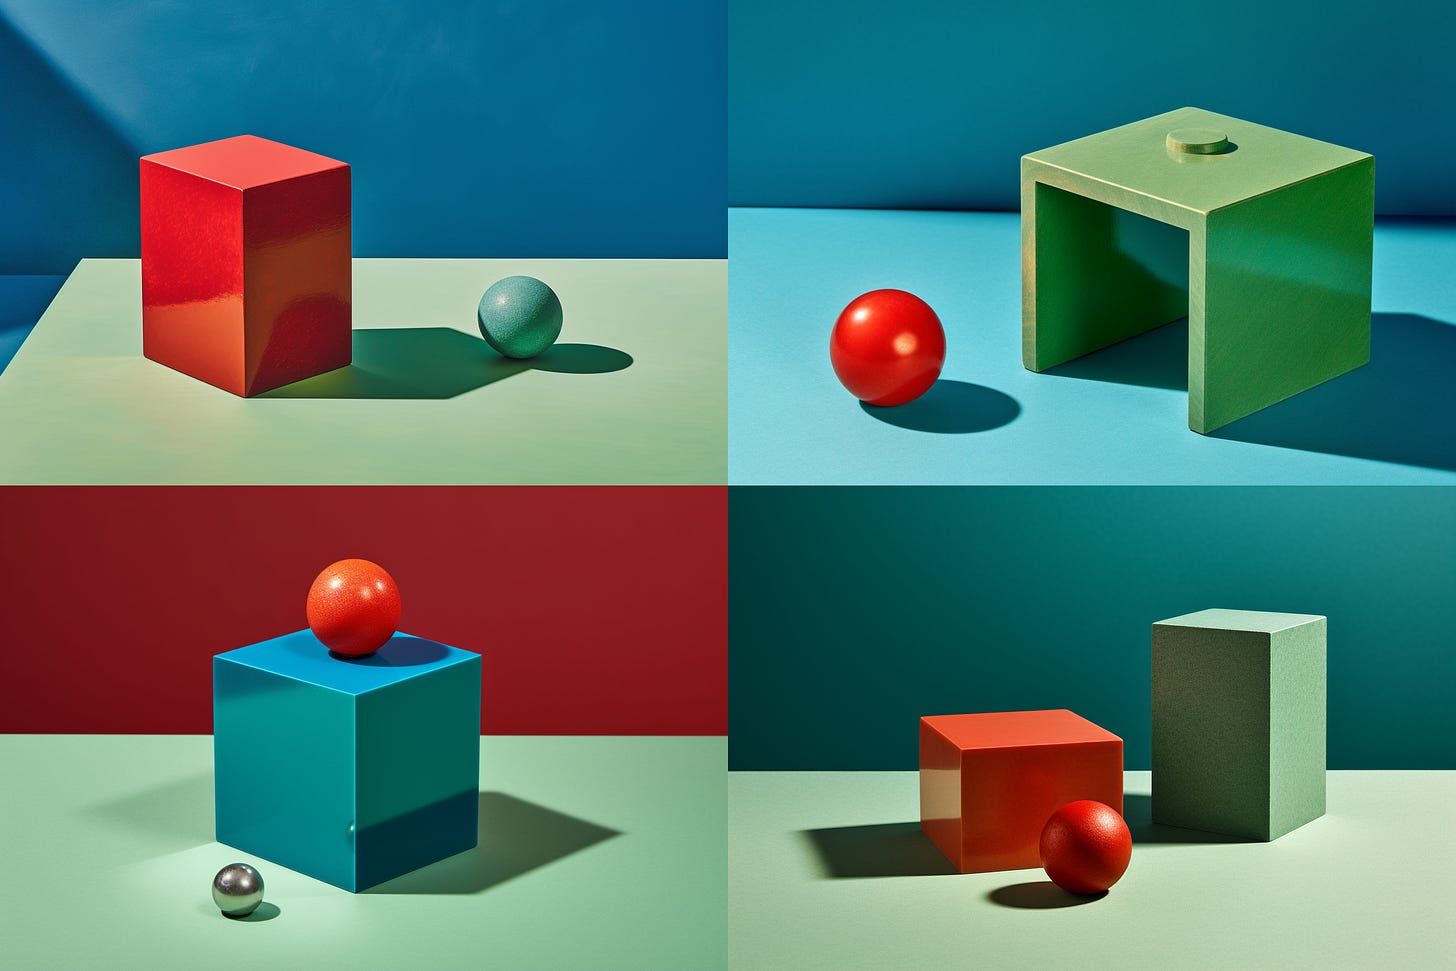 Midjourney V5.1 results for "one red ball and two green cubes on a blue table" -  4-image grid.